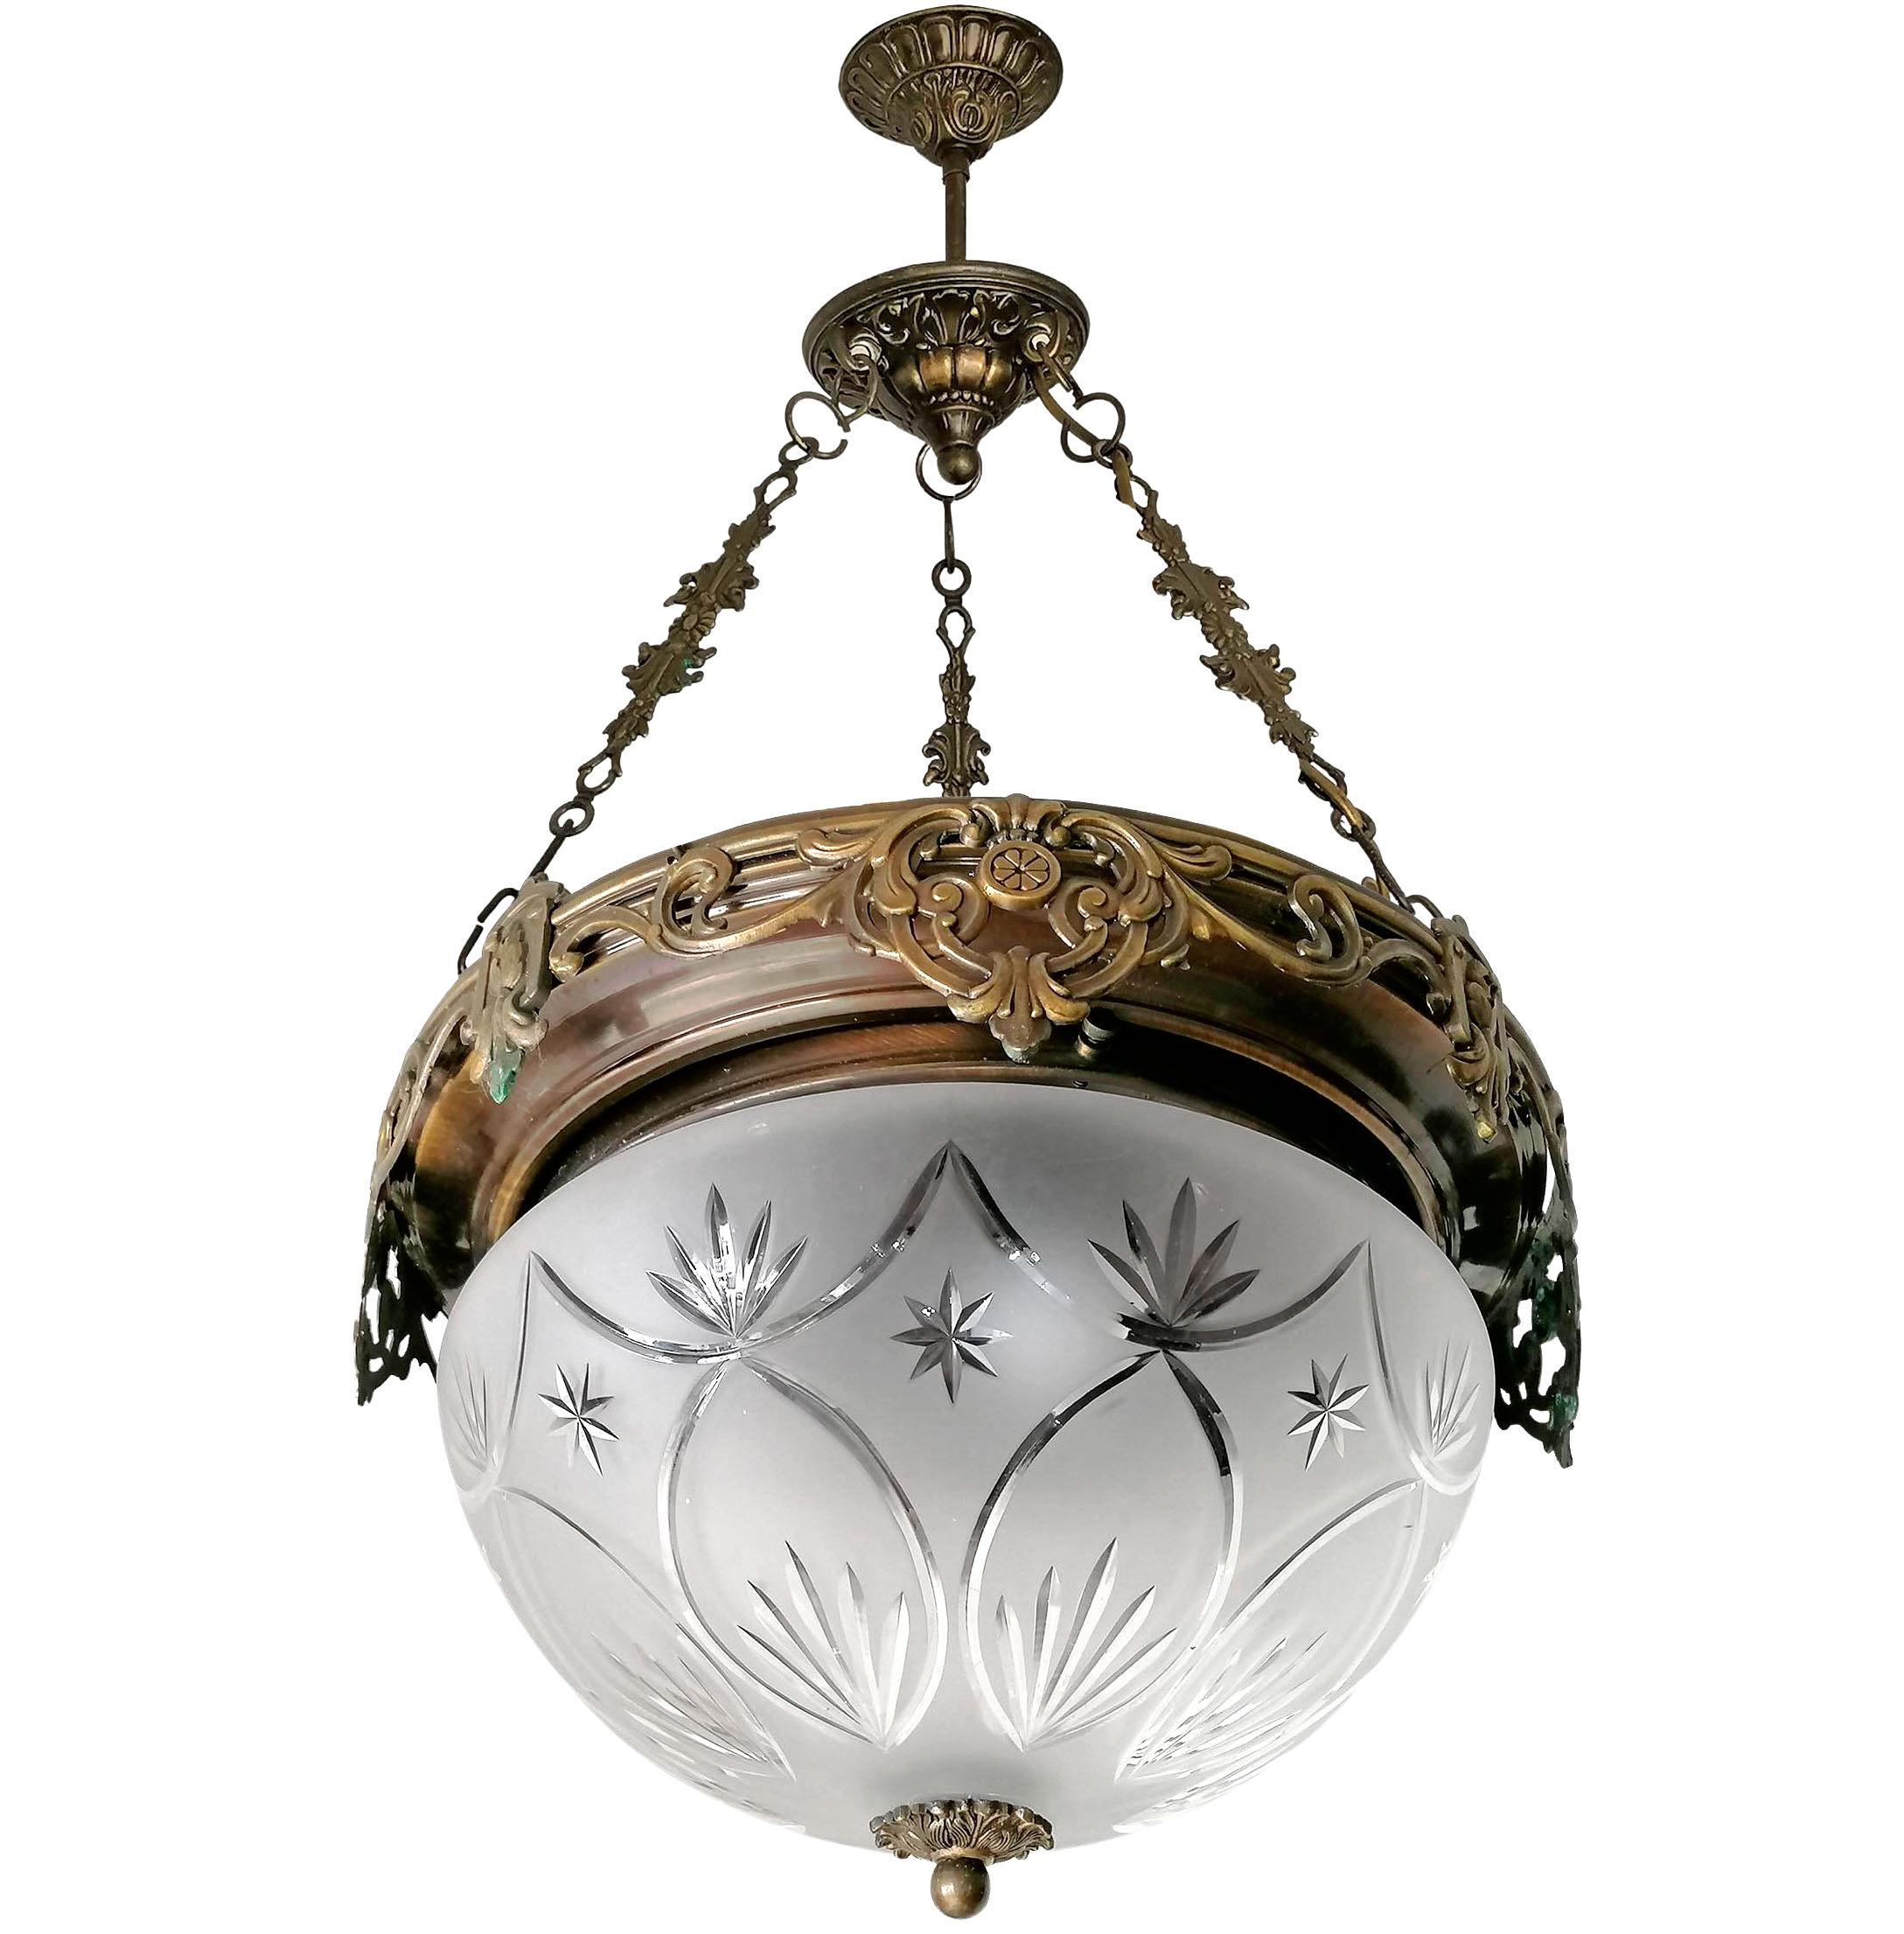 A wonderful ceiling fixture decorated with fine ornaments. In very good condition, original cut glass dome without damages and brass with beautiful patina,
France, 20th century.

3 light bulbs (E27) each, rewired.
Assembly required.

